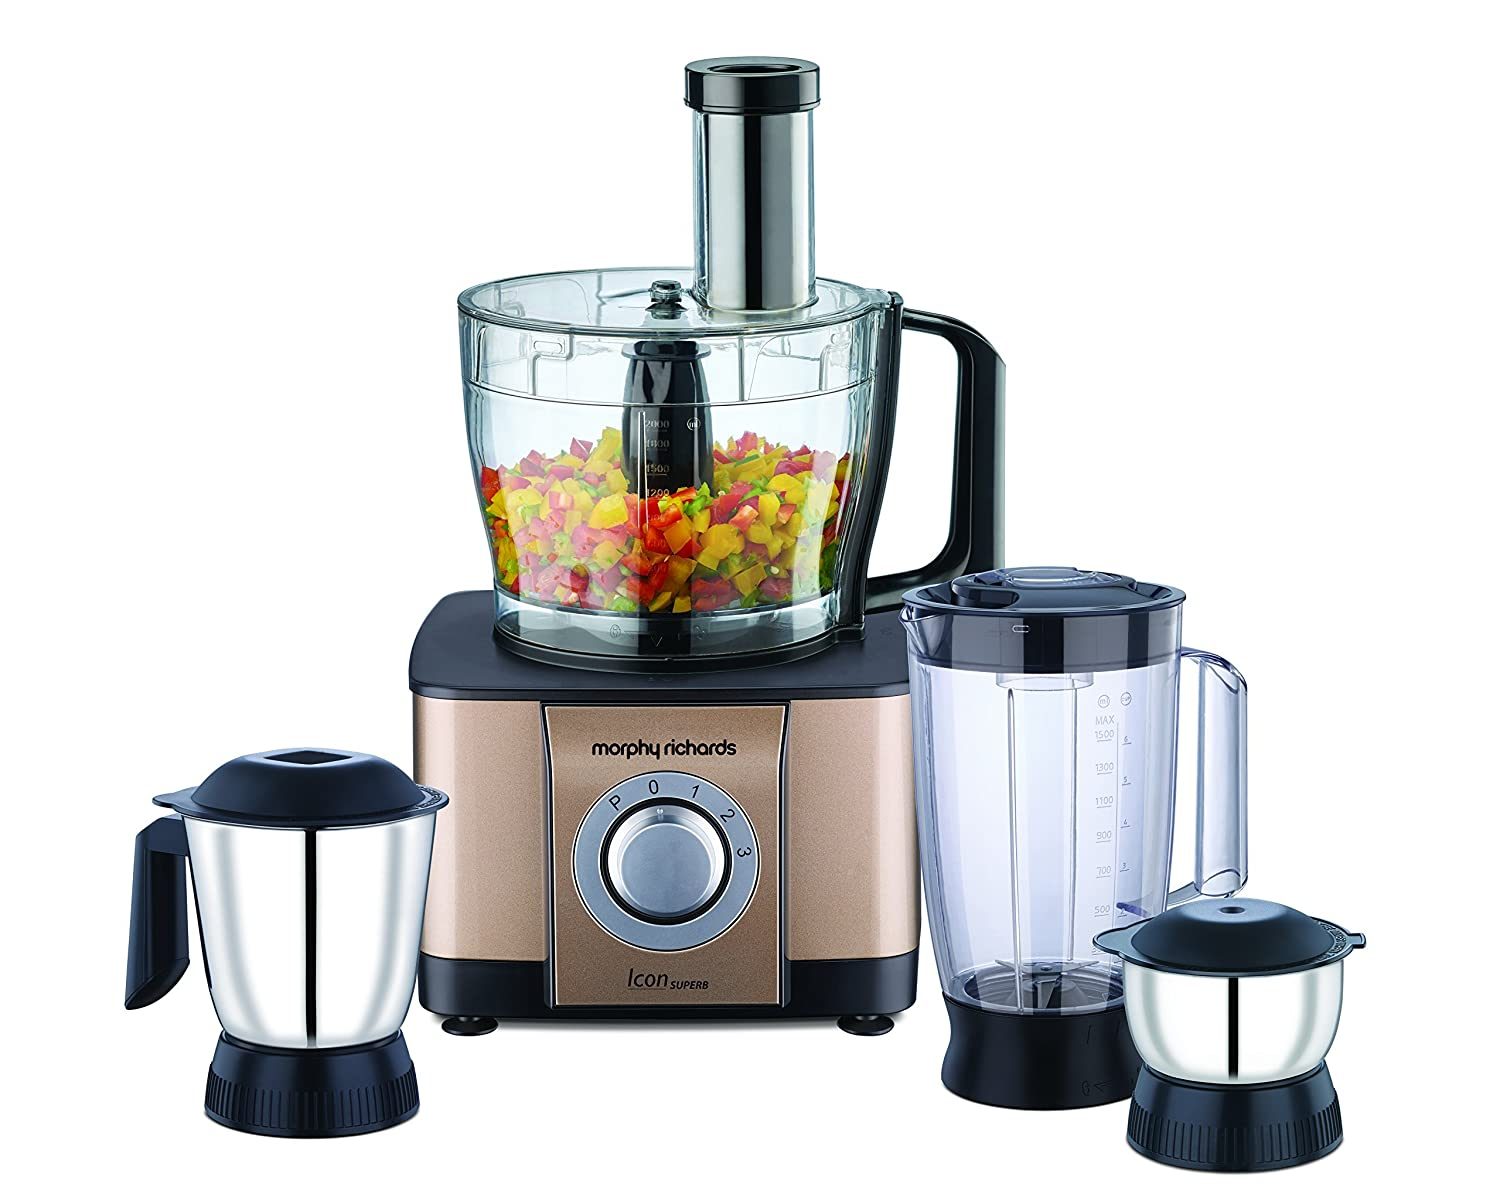 Morphy Richards Icon Superb-best food processor in India 2021